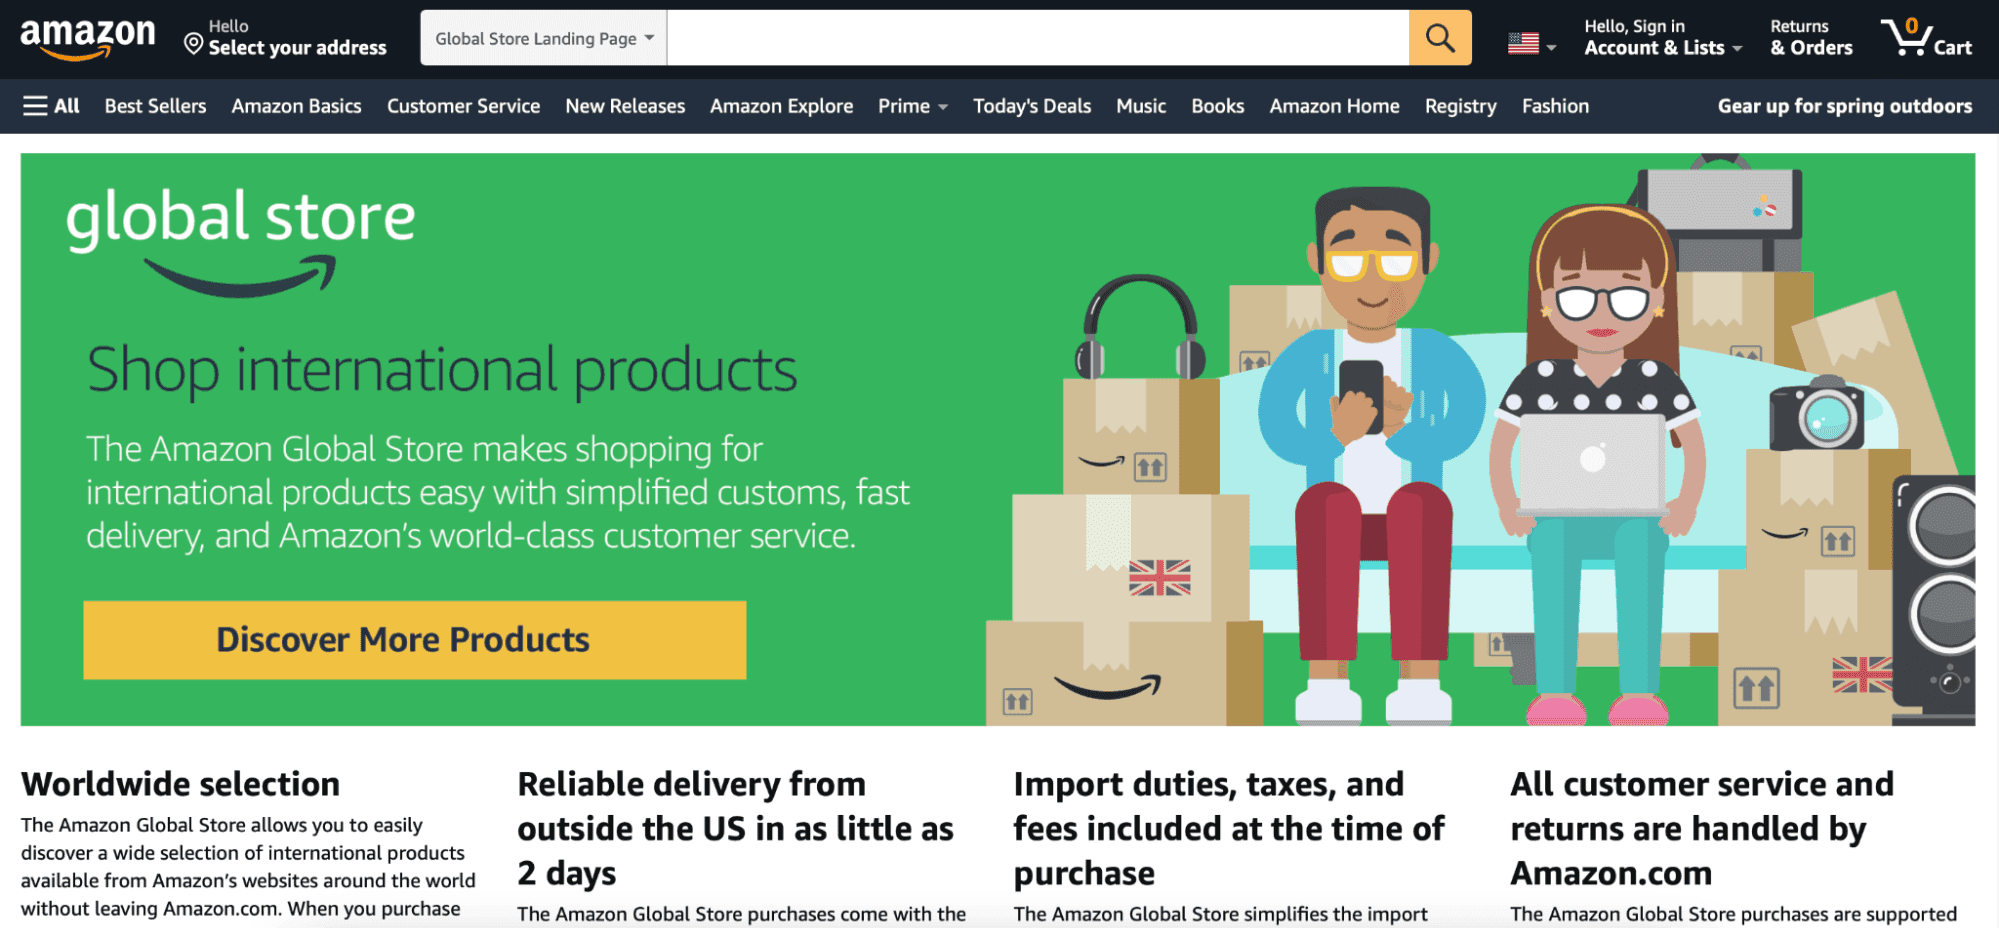 image showcasing the 'Global Store' feature on Amazon's website. This feature allows users to shop international products.